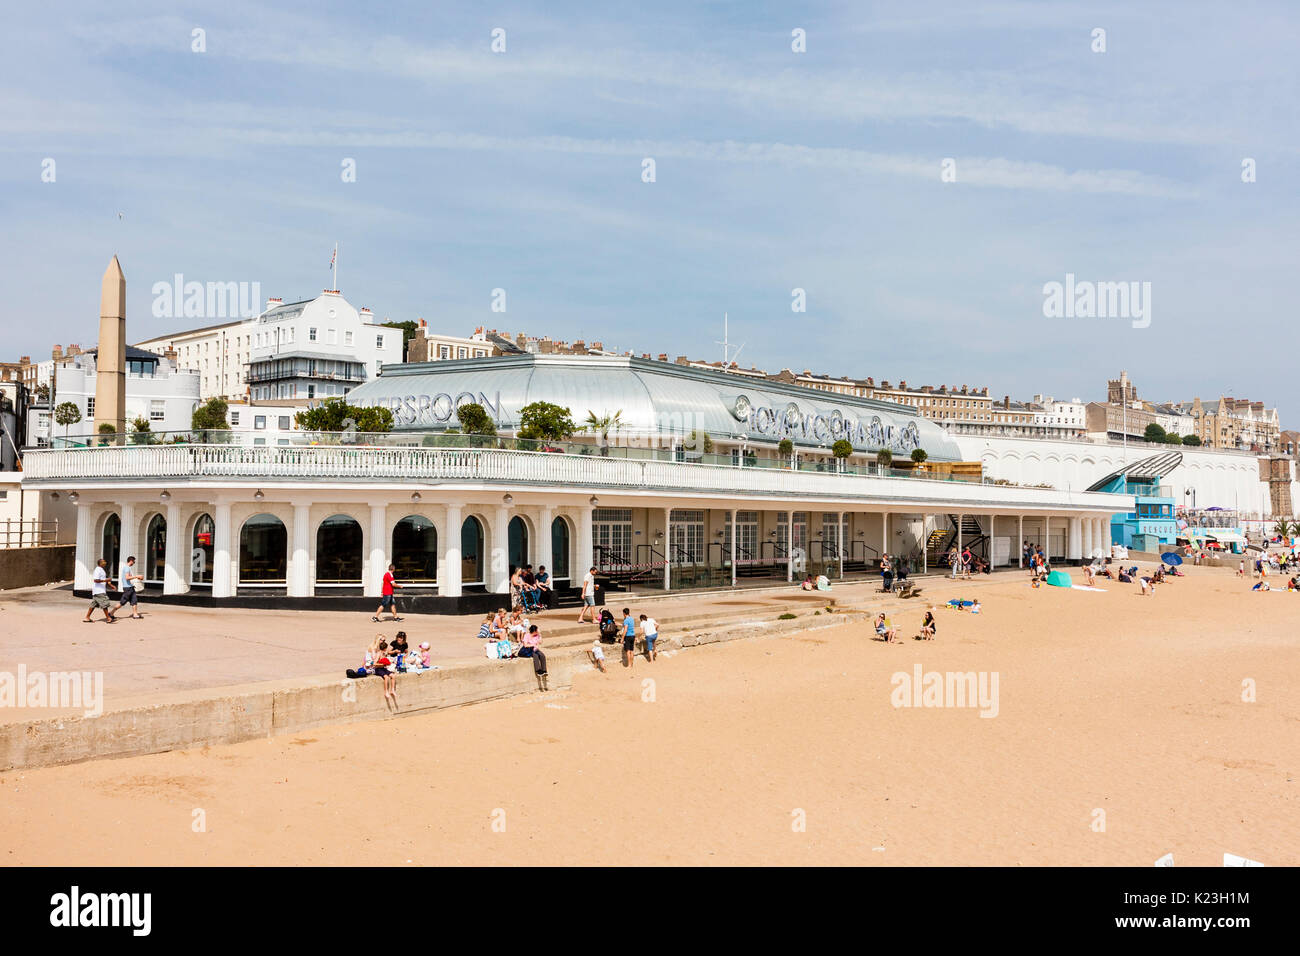 The Victorian Pavilion on the seafront at Ramsgate, restored by Weatherspoons into the largest pub in England. Beach view of the building. Daytime, blue sky. Stock Photo